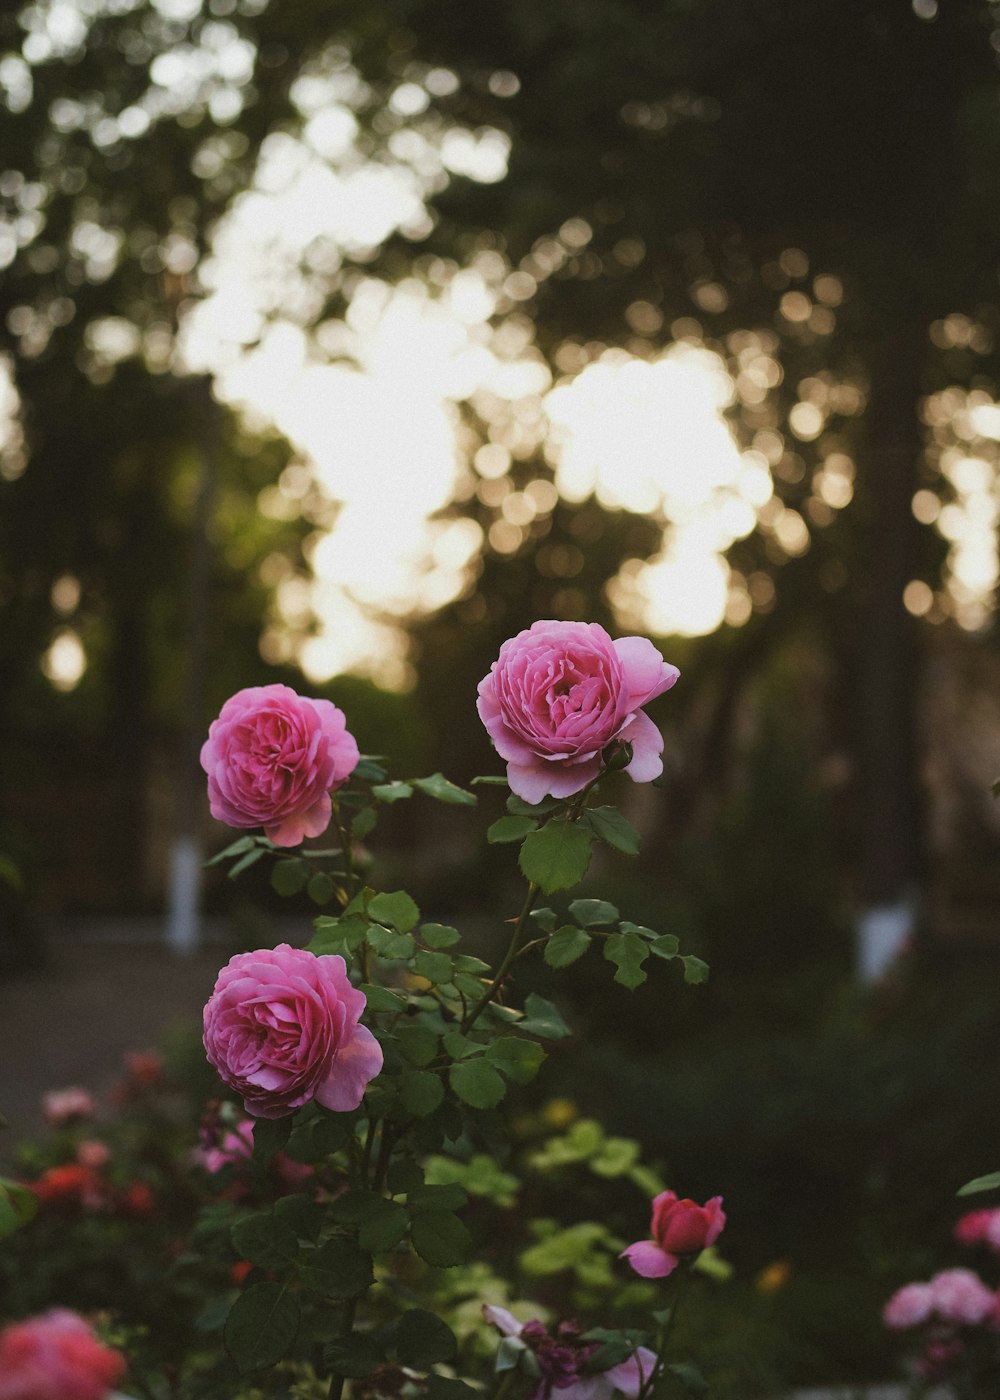 A group of flowers photo – Free Wallpaper Image on Unsplash